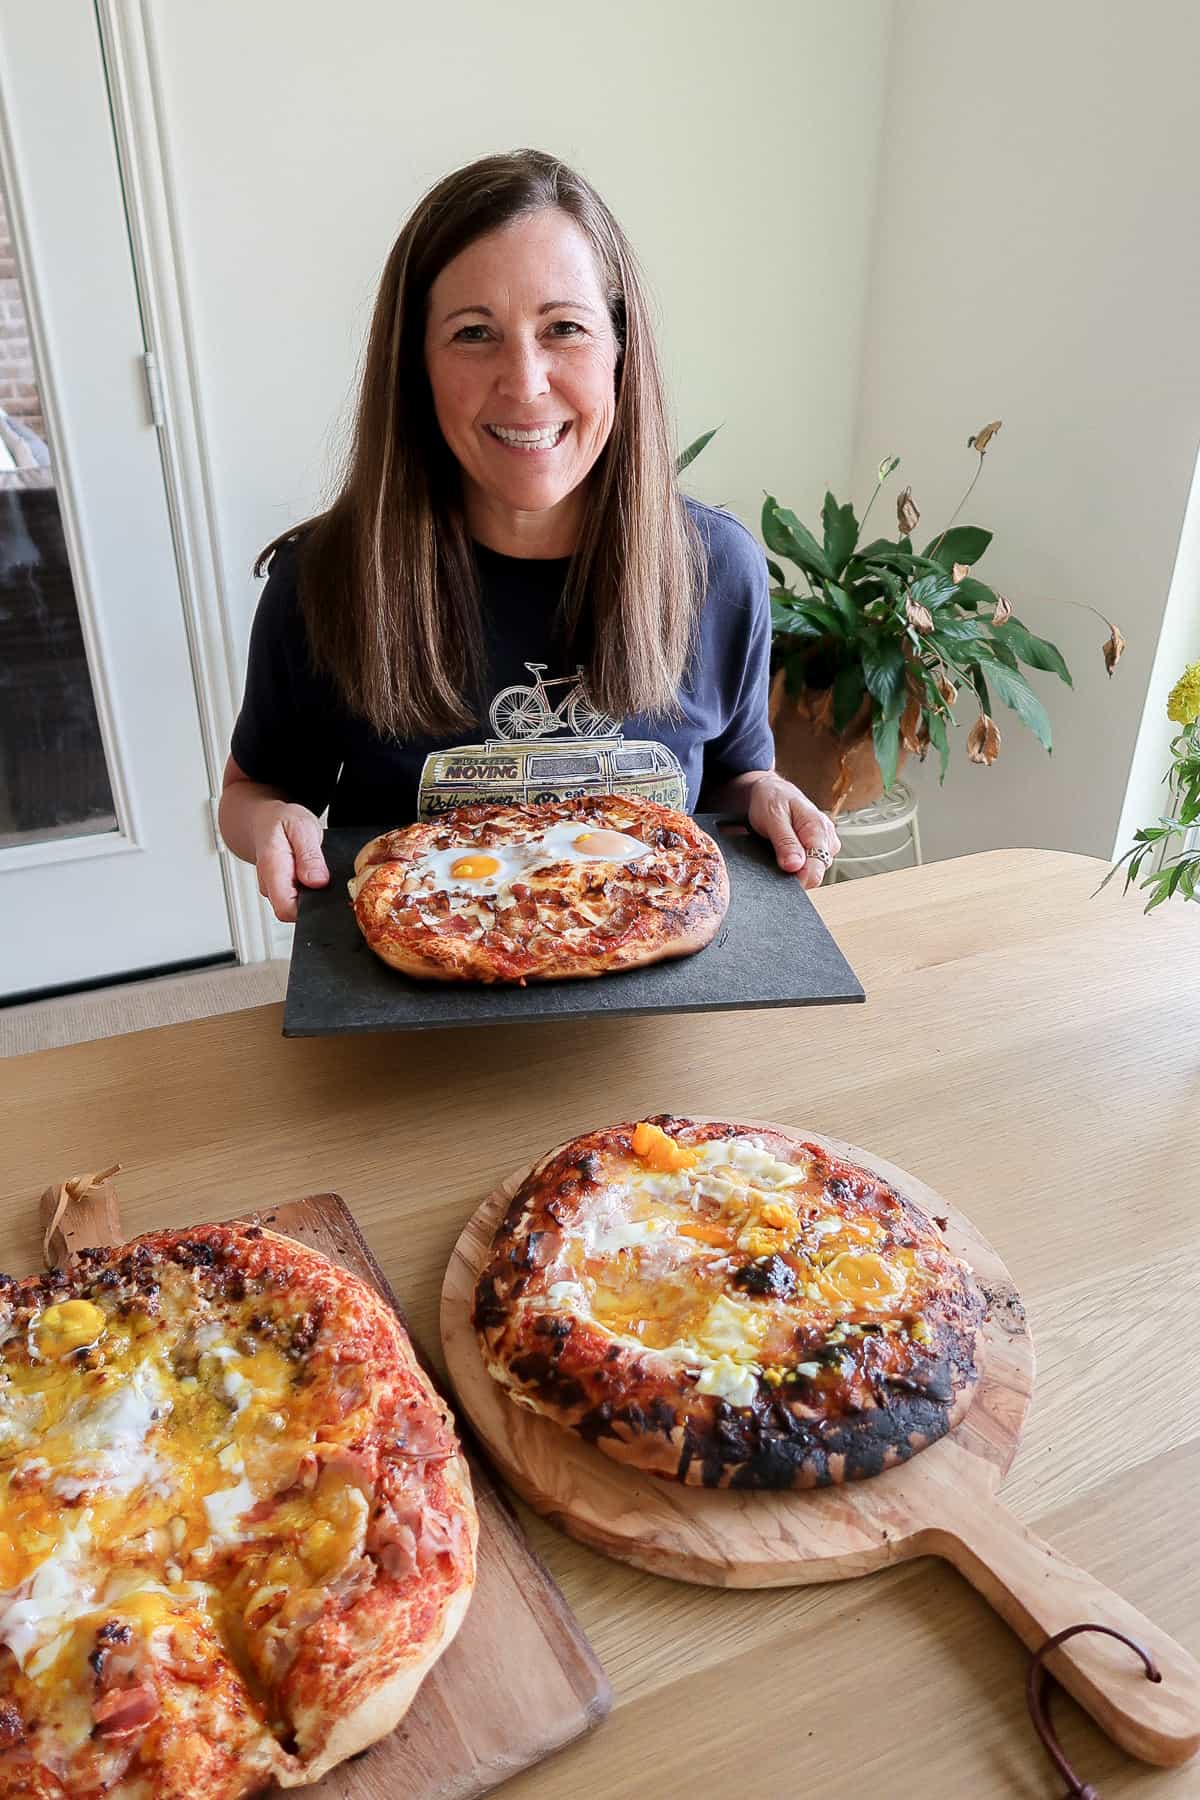 SueBee Homemaker holding a board with a breakfast pizza.